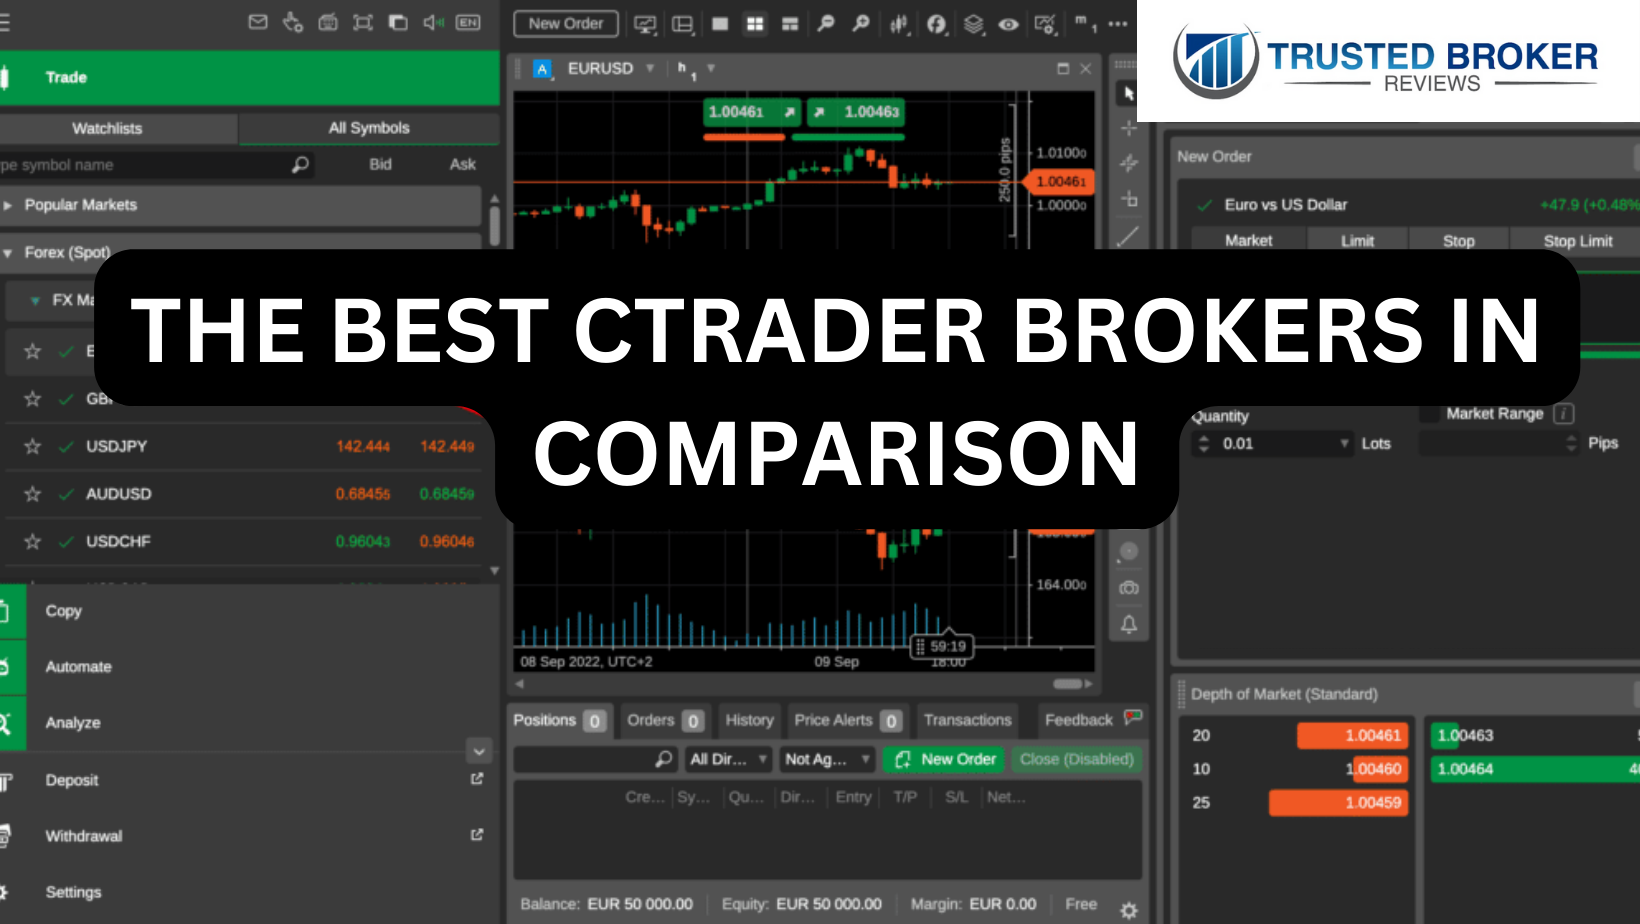 THE BEST CTRADER BROKERS IN COMPARISON